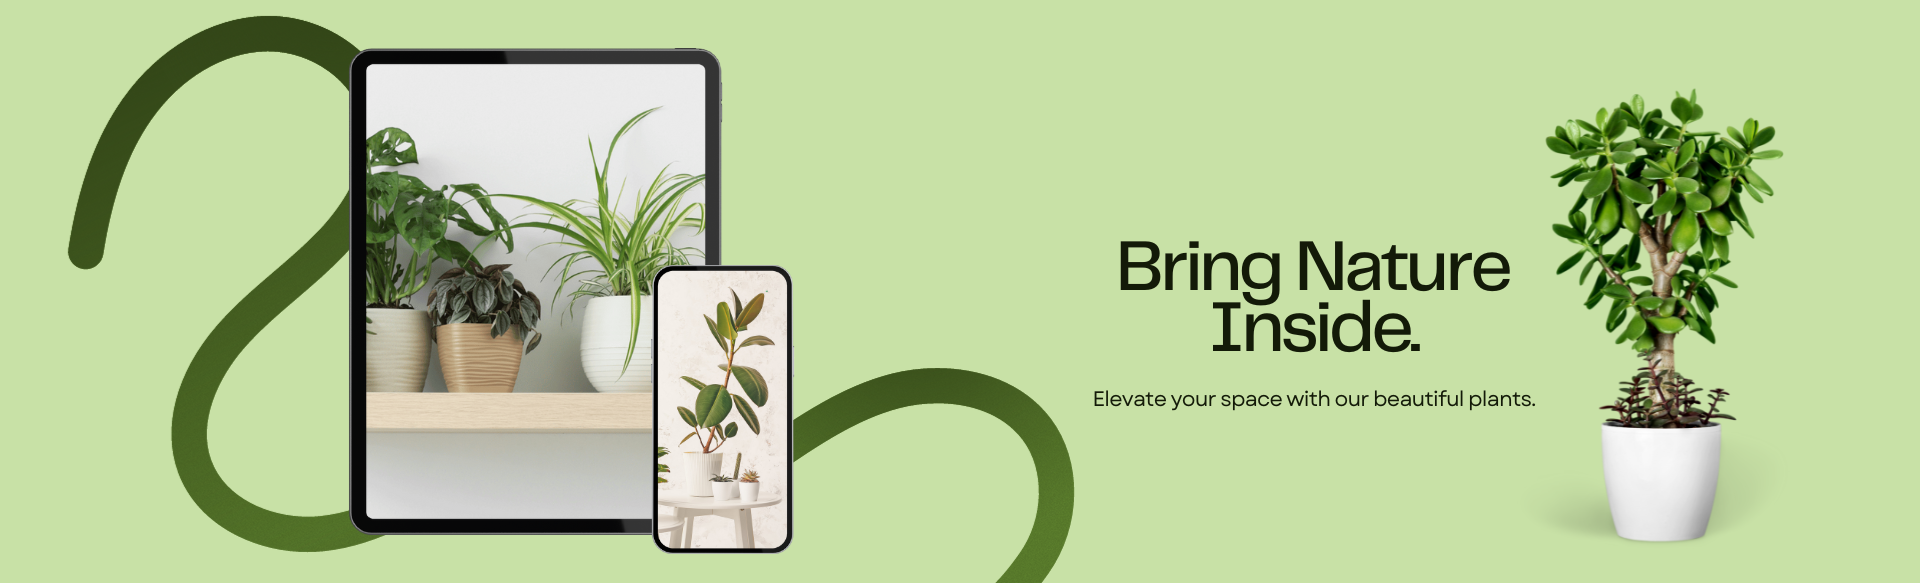 "Spruce up Your Space with Jenn Online: Enhance Your Décor with Stylish Indoor Plants Available for Purchase!"